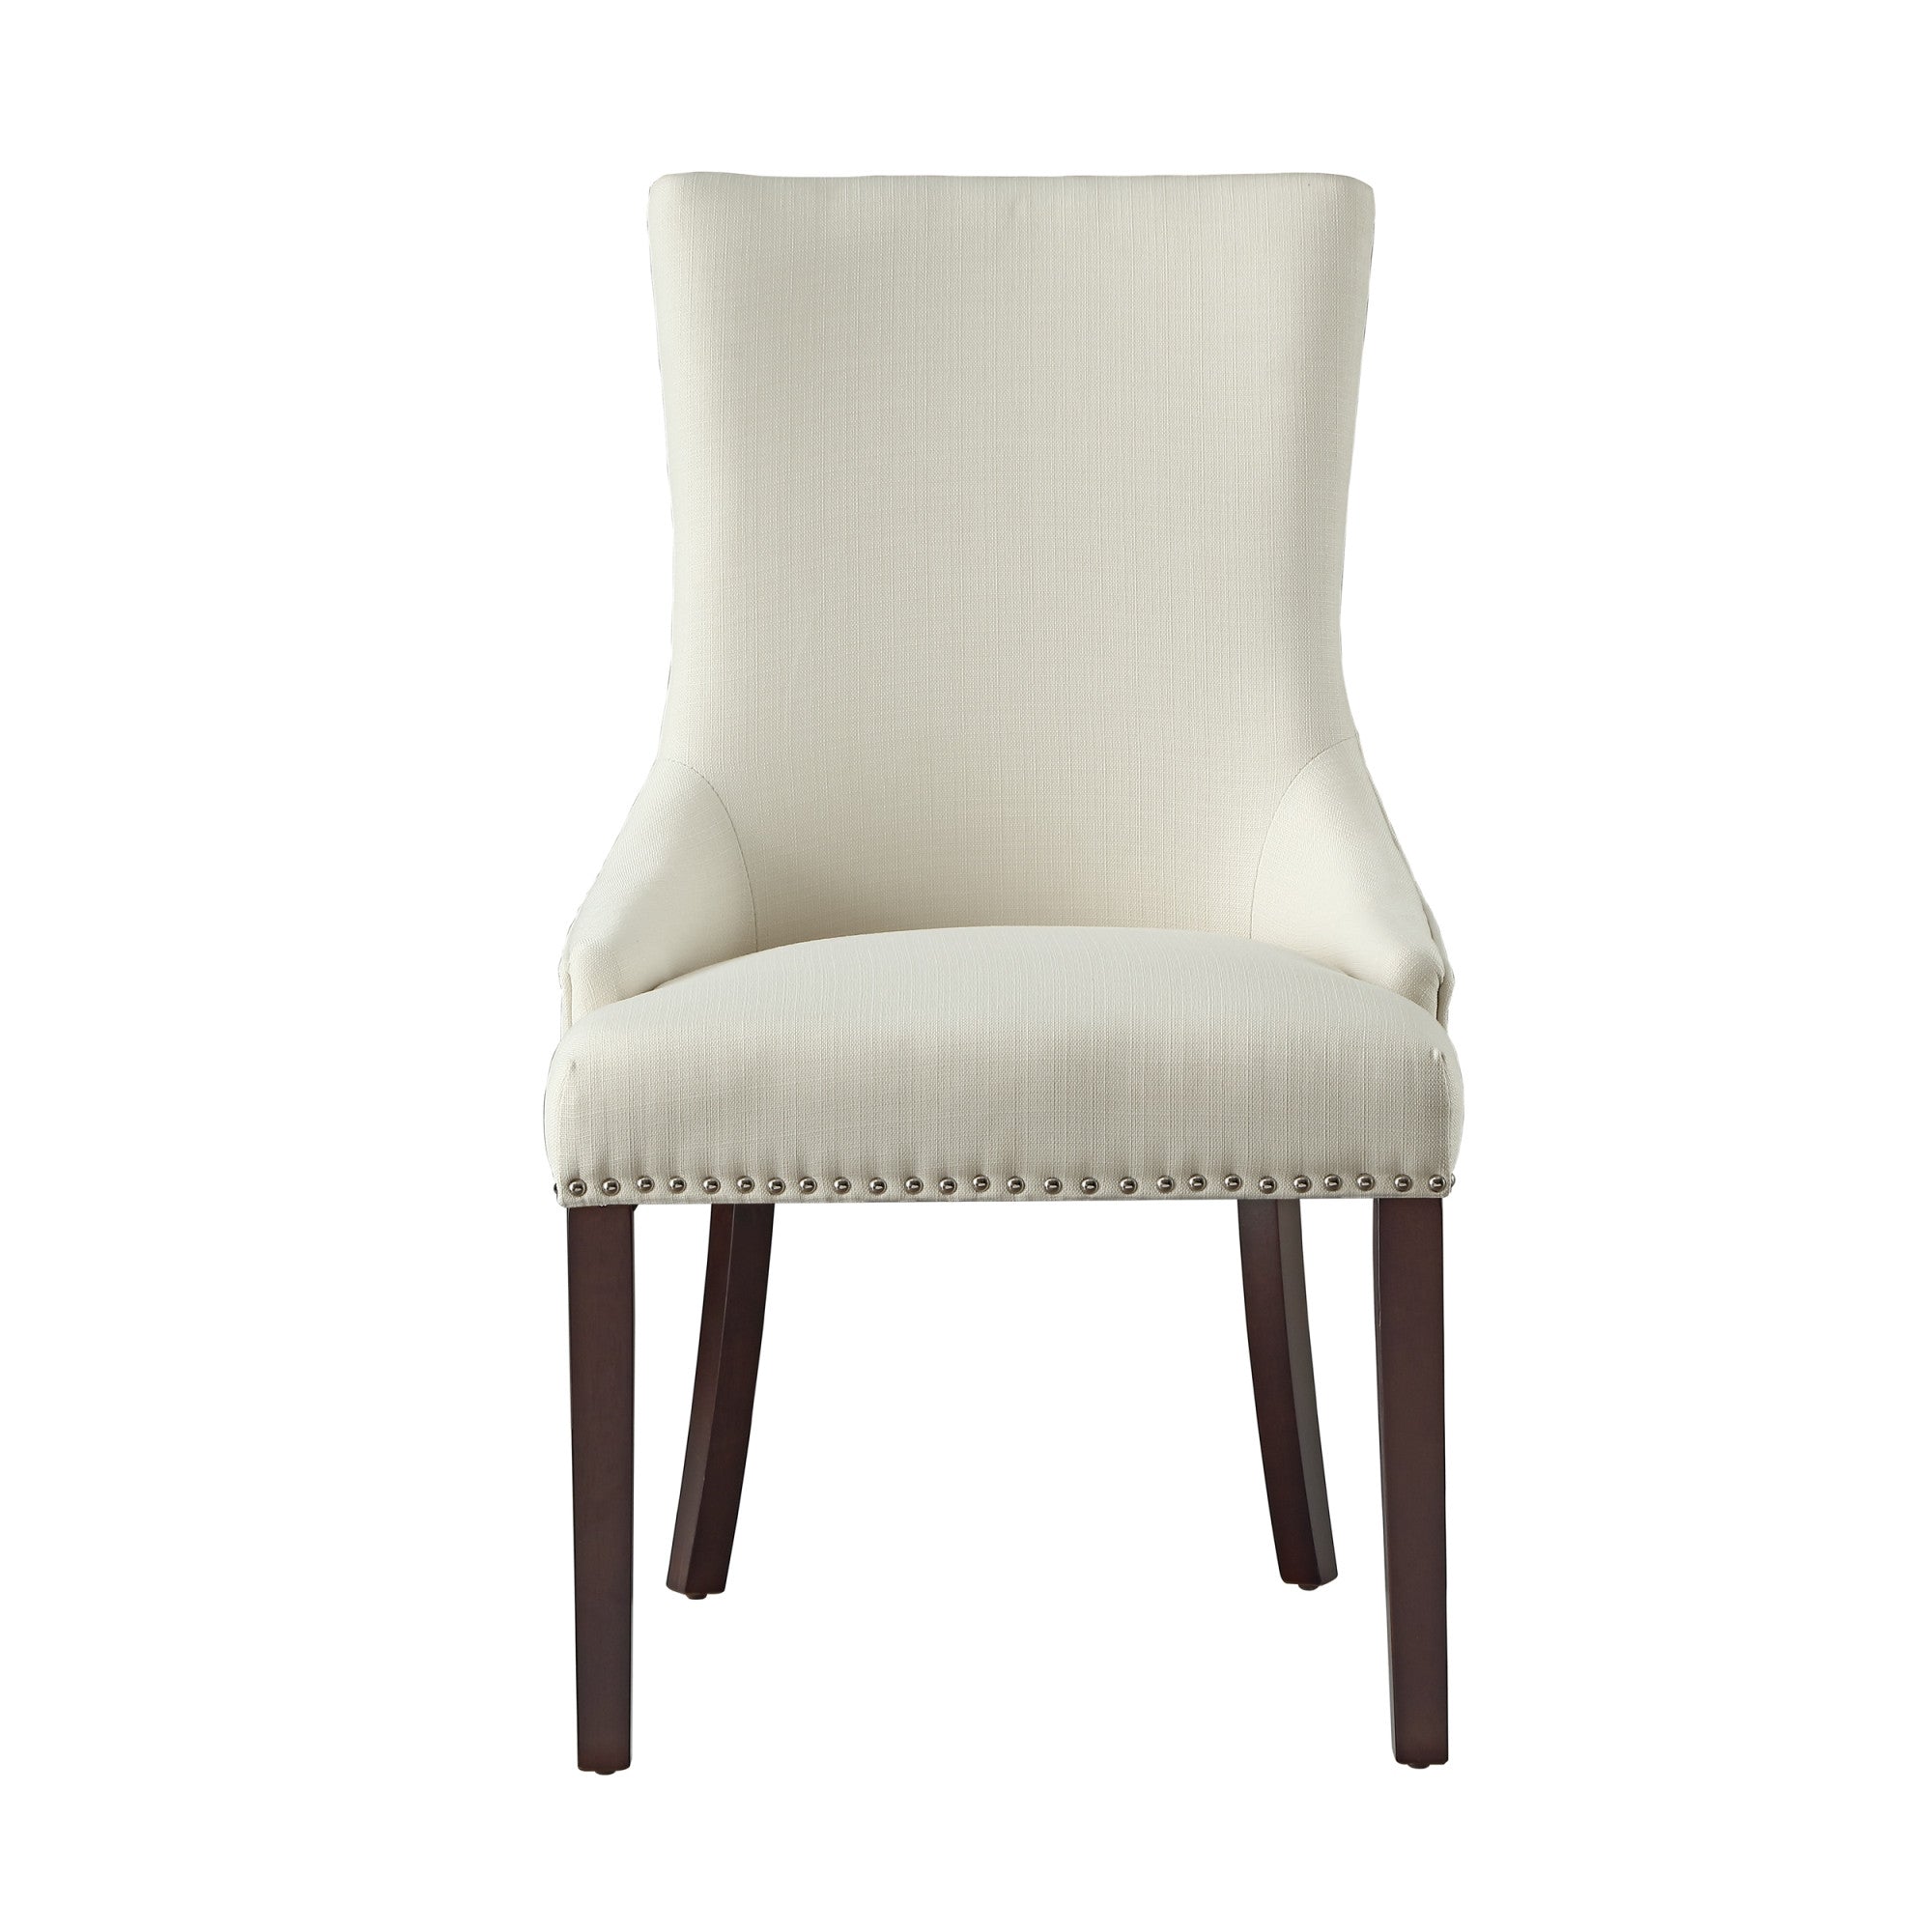 Set of Two Tufted Cream and Espresso Upholstered Linen Dining Side Chairs